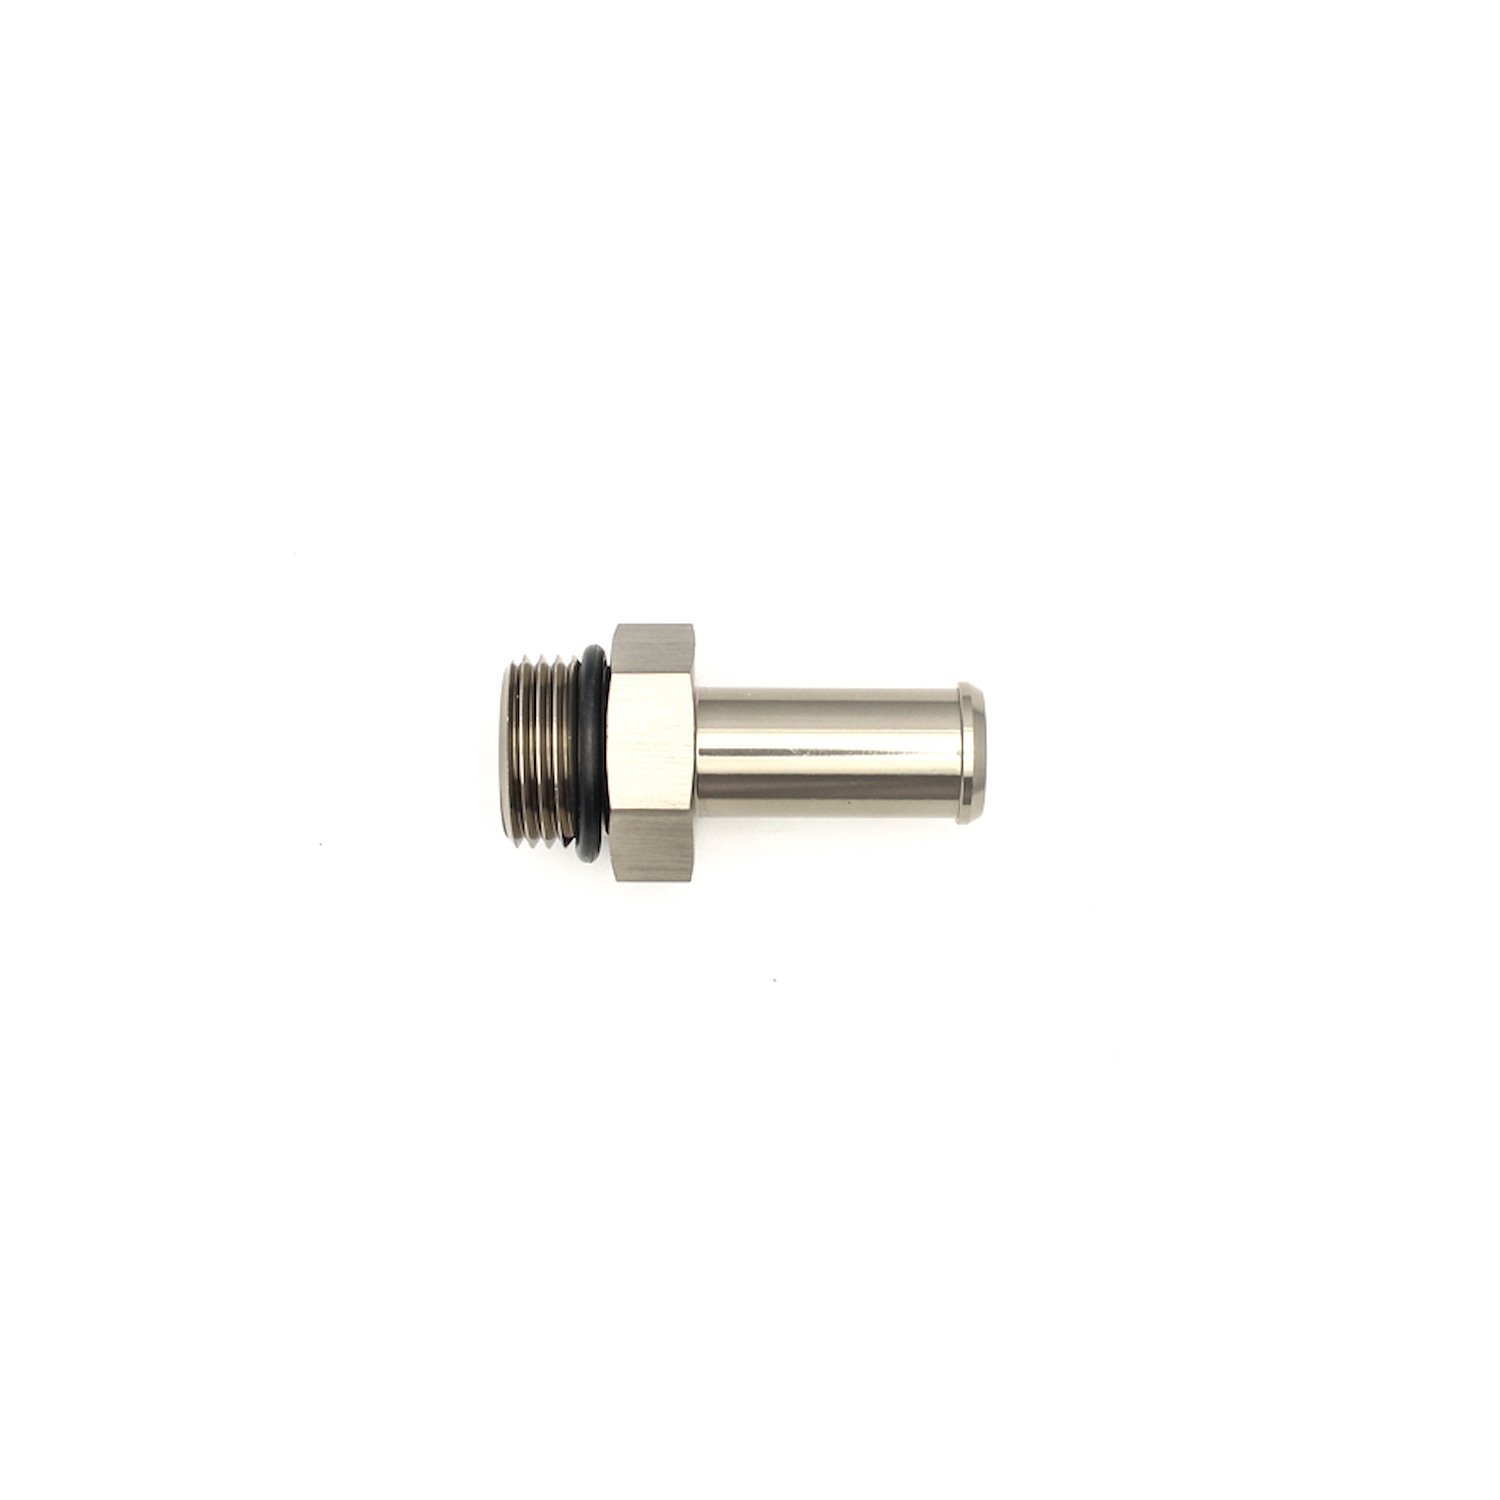 6020508 8AN ORB Male to 1/2 Inch Male Barb Fitting (Incl O-Ring) Anodized DW Titanium